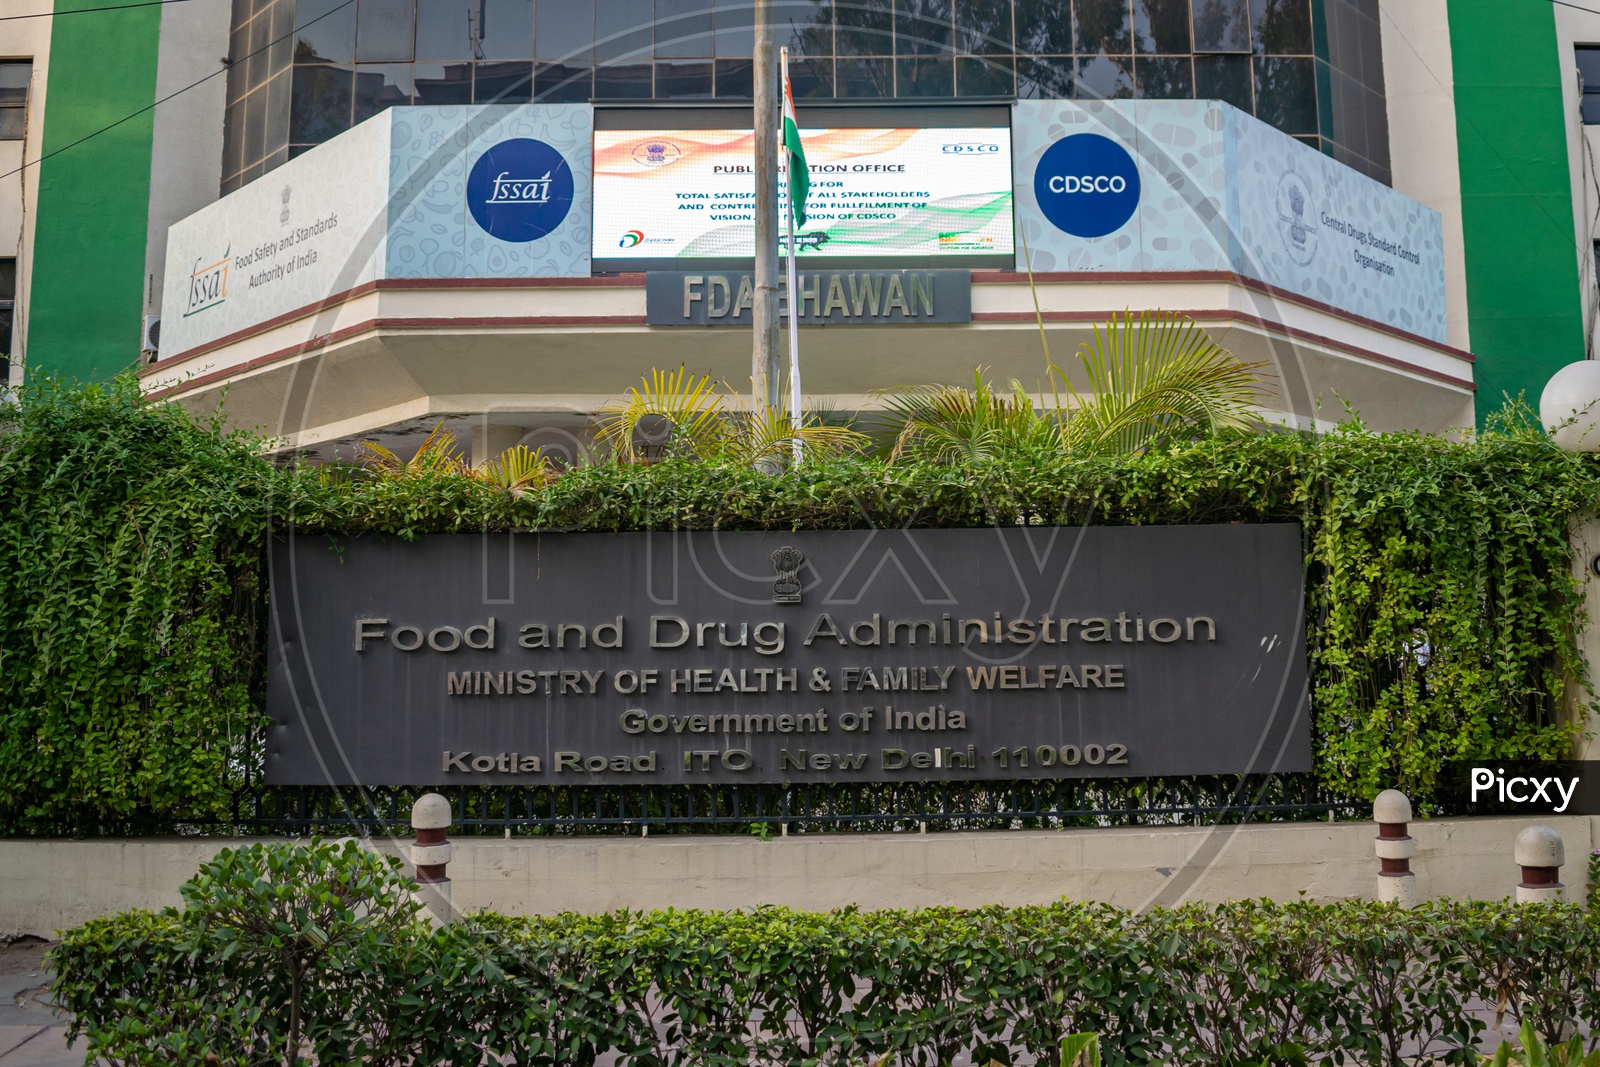 Food Safety and Standards Authority of India (FSSAI) and Central Drugs Standard Control Organization(CDSCO) situated in FDA(Food and Drug Administration) Bhawan, Delhi